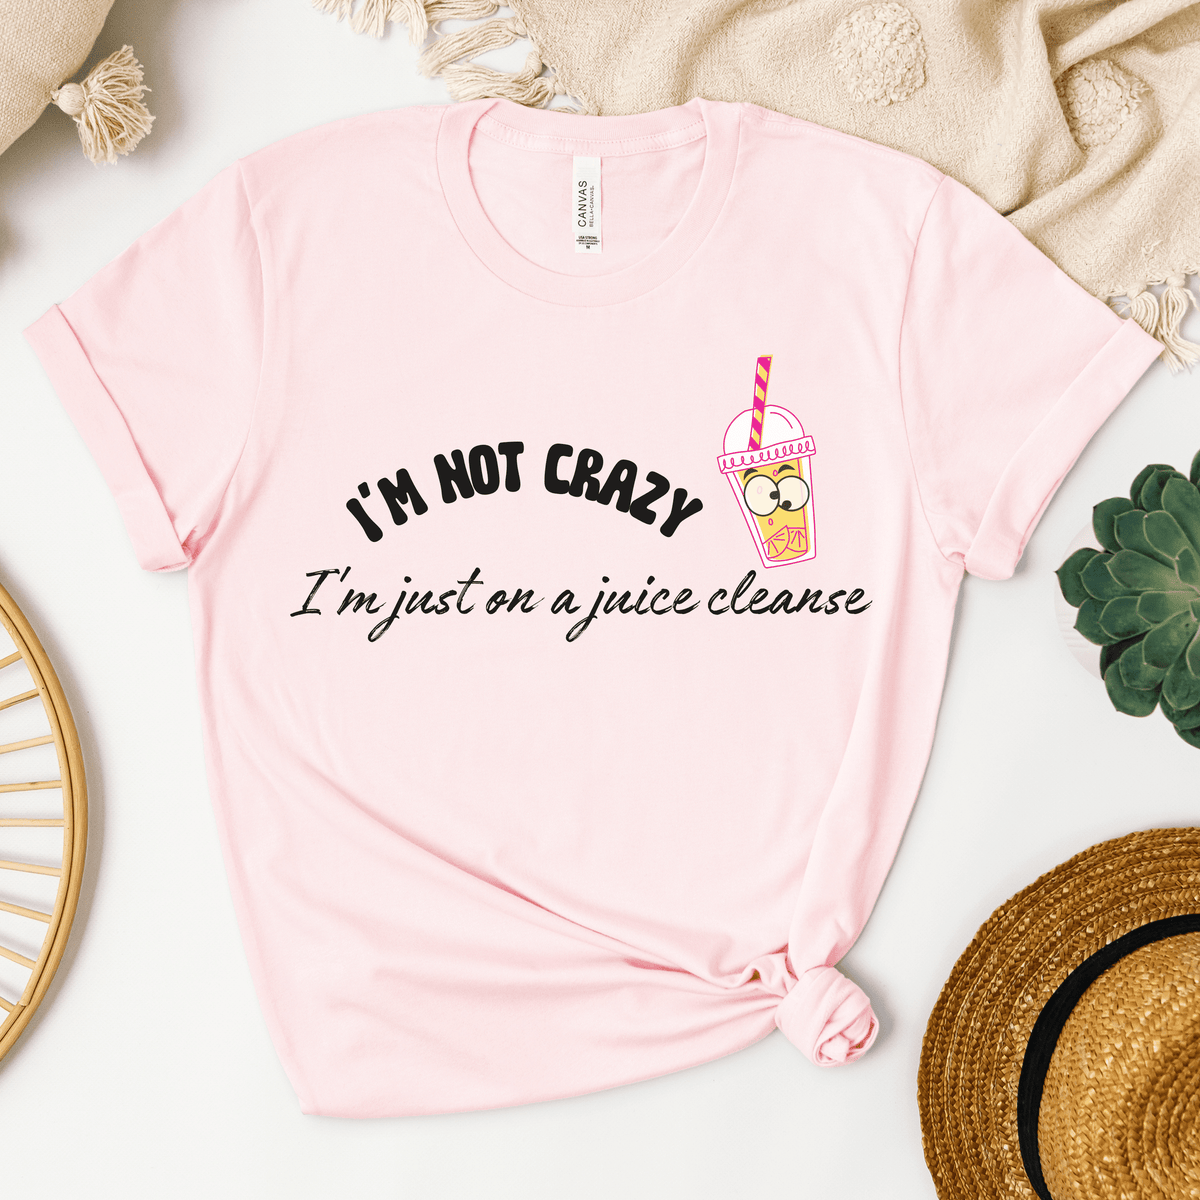 I'm Not Crazy, I'm Just on a Juice Cleanse" T-shirt